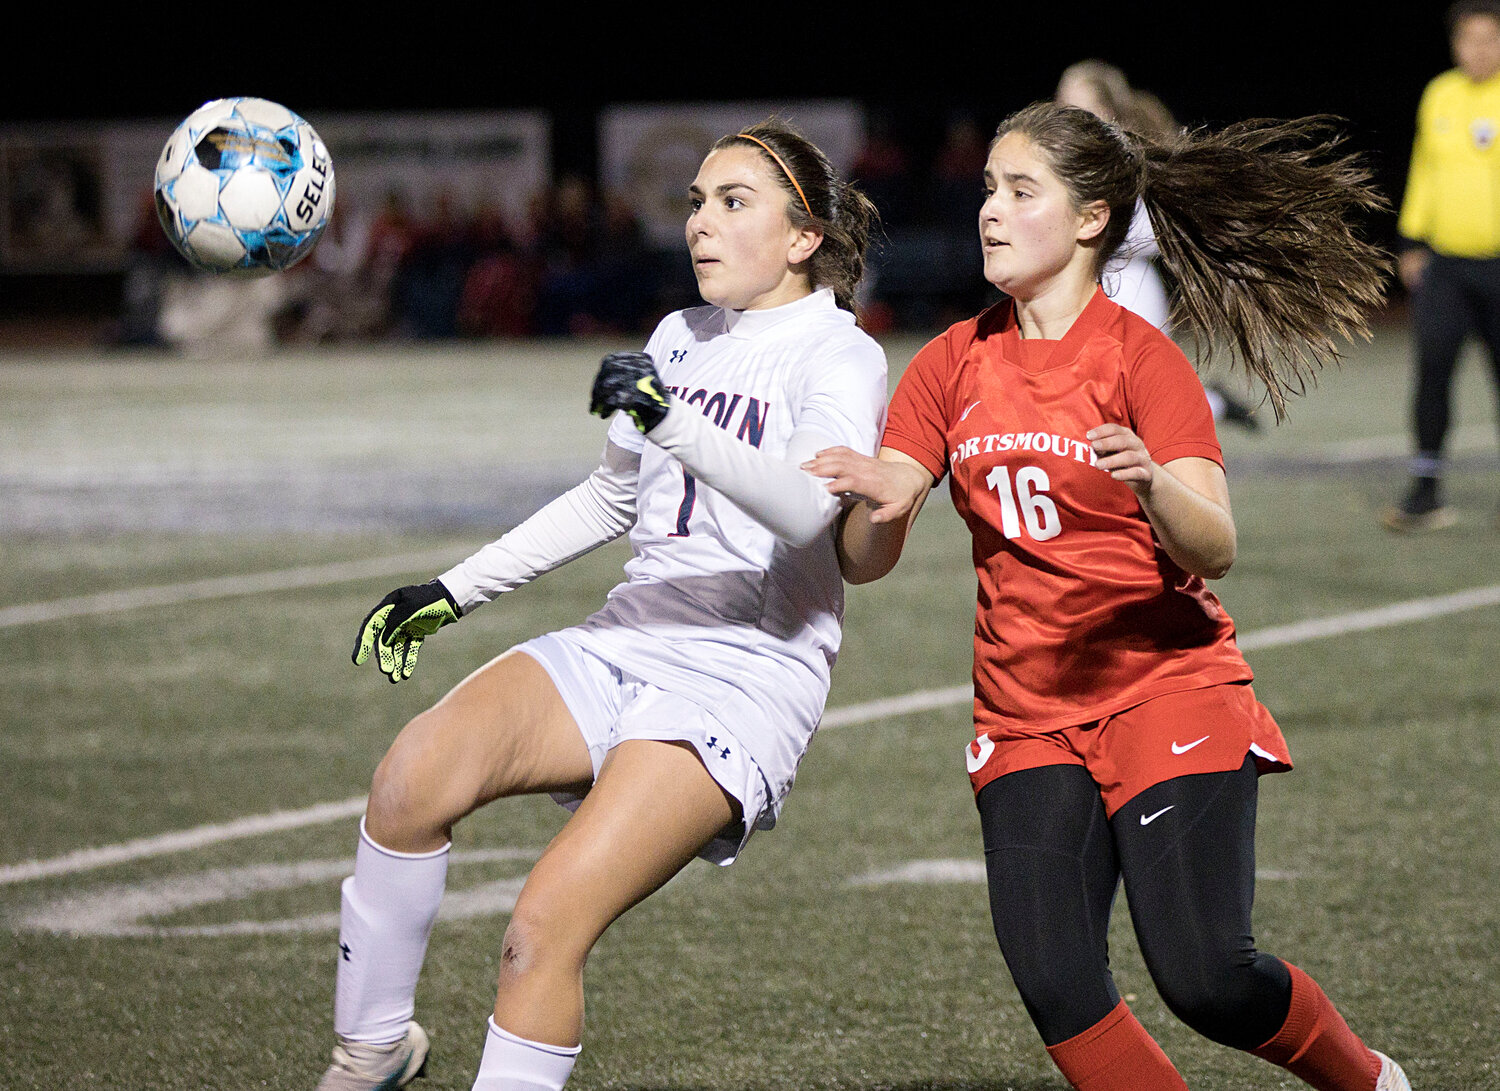 Evelyn Shuster vies for position on a throw-in pass.